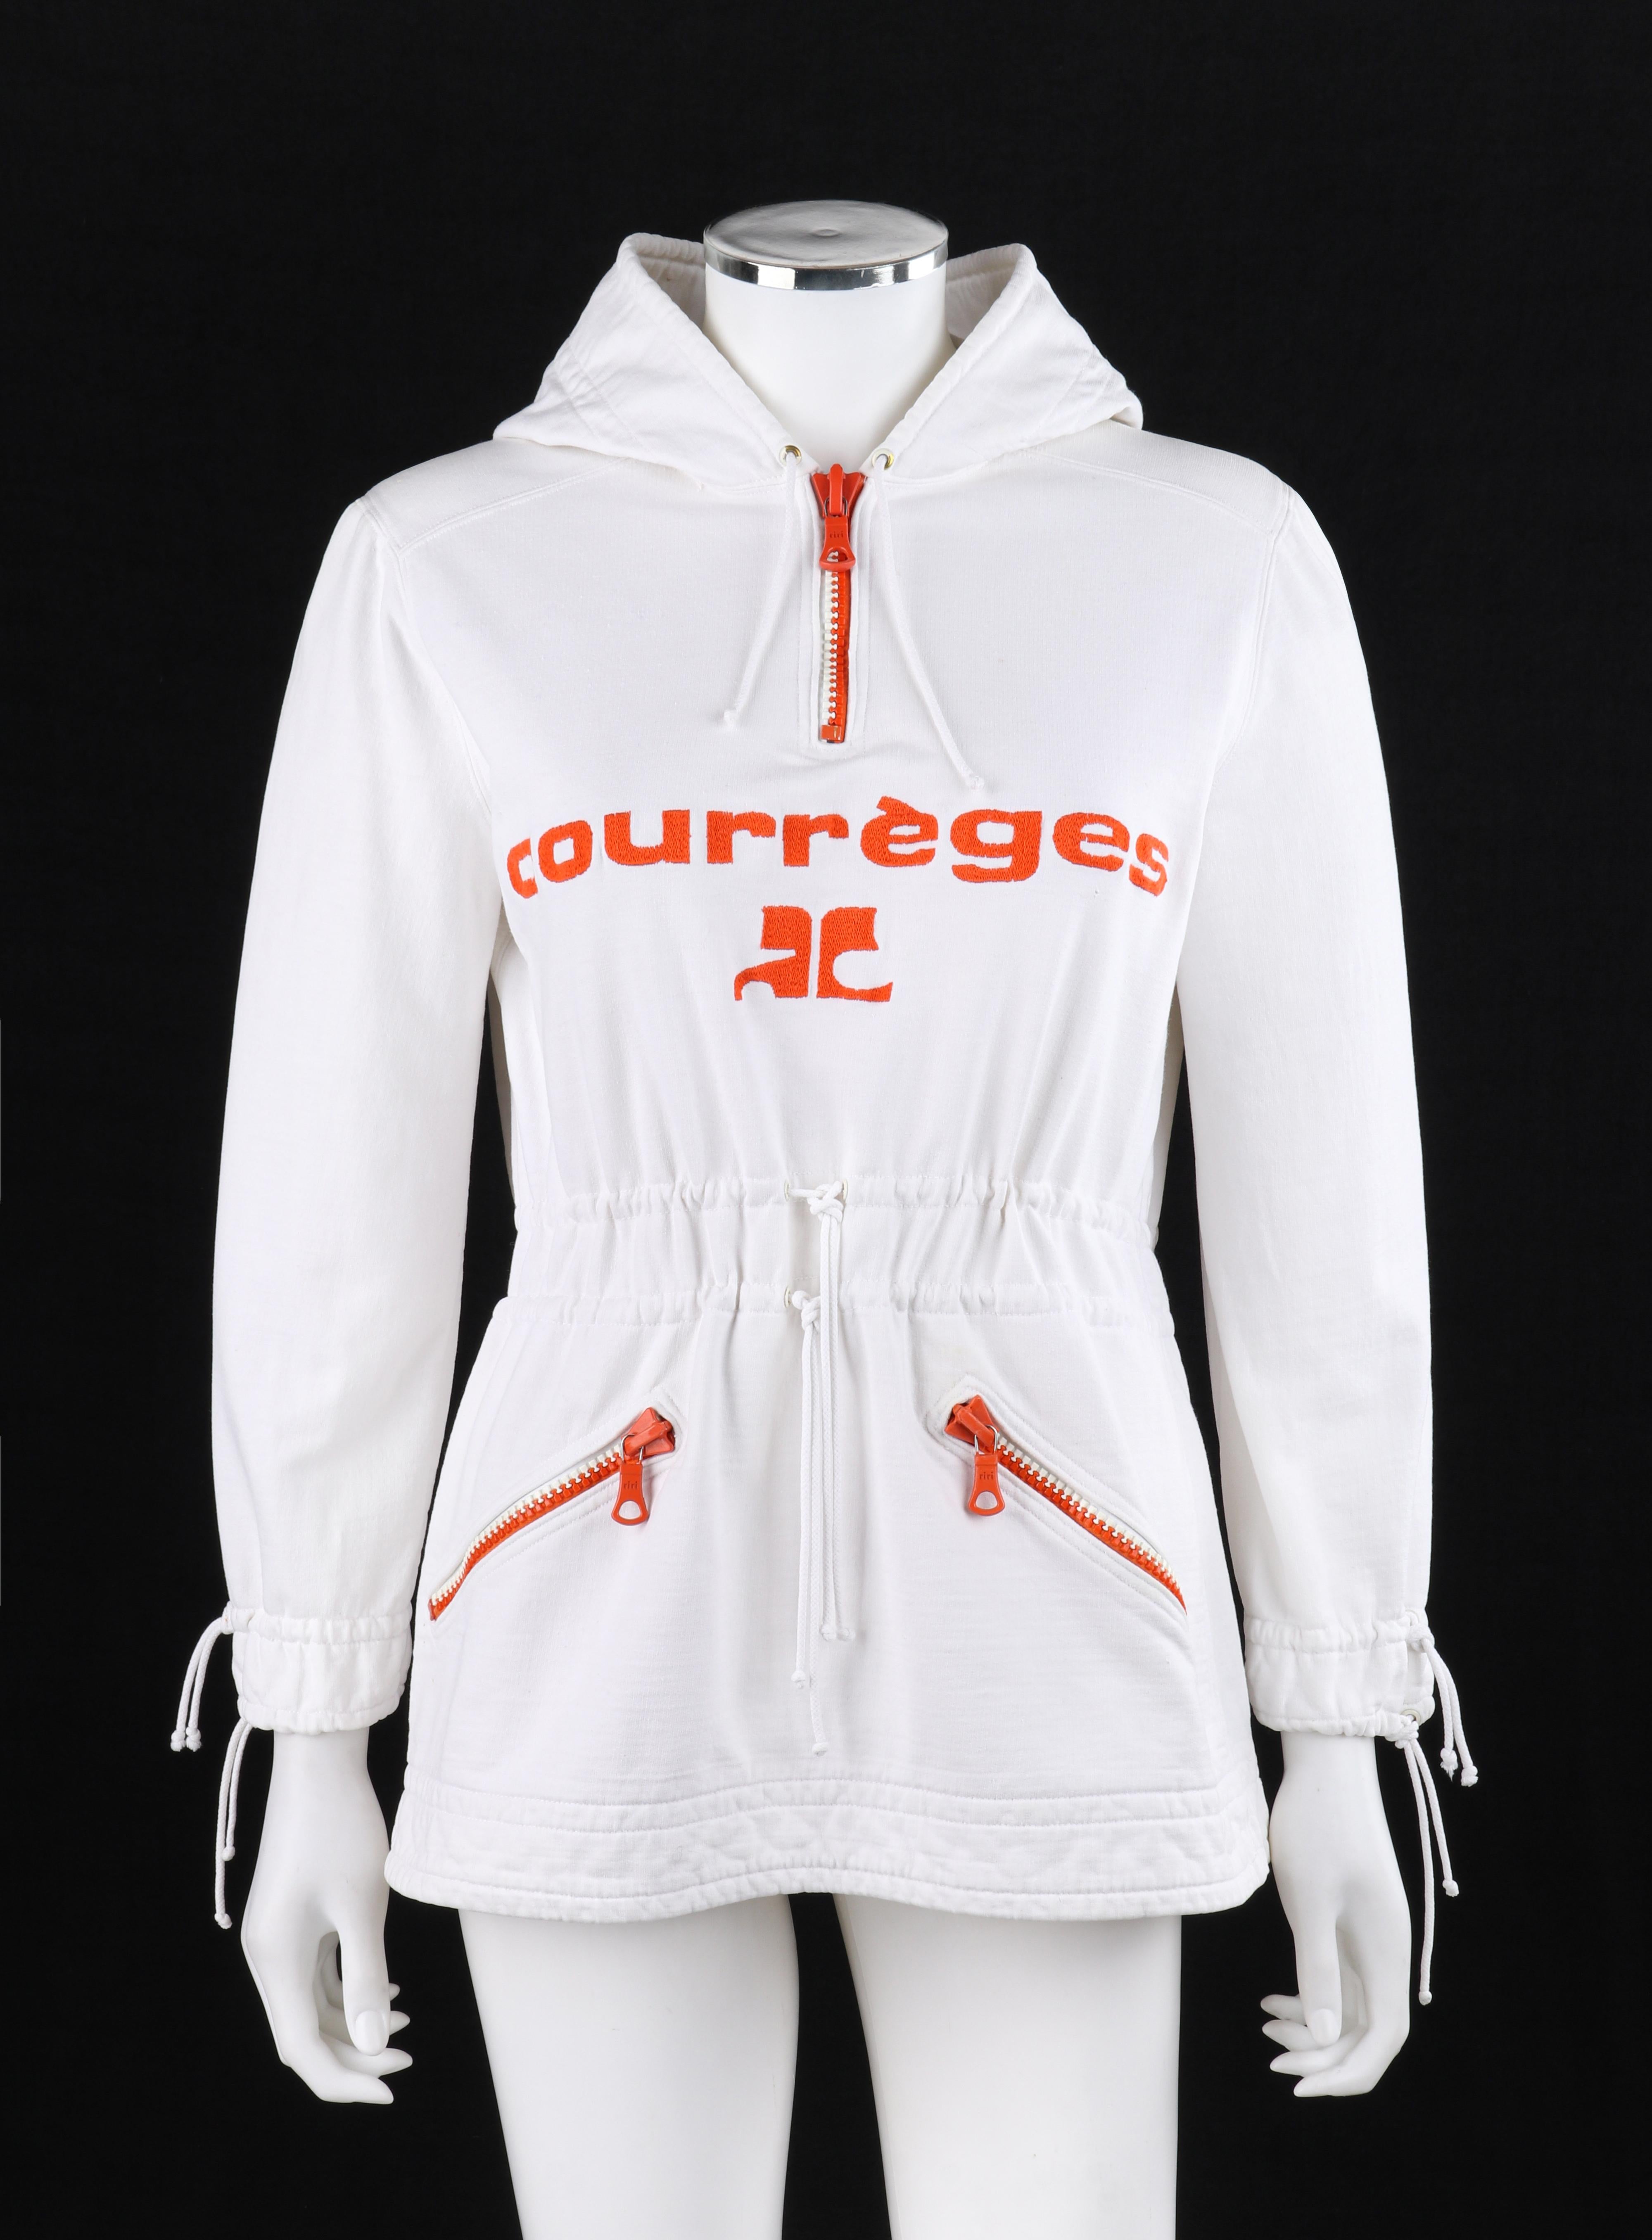 COURREGES Paris Hyperbole c.1970’s White Embroidered Quarter Zip Pullover Hoodie
 
Brand / Manufacturer: Courrèges Paris Hyperbole
Circa: 1970’s 
Style: Quarter zip pullover
Color(s): Shades of white and orange
Lined: No
Marked Fabric Content: 100%